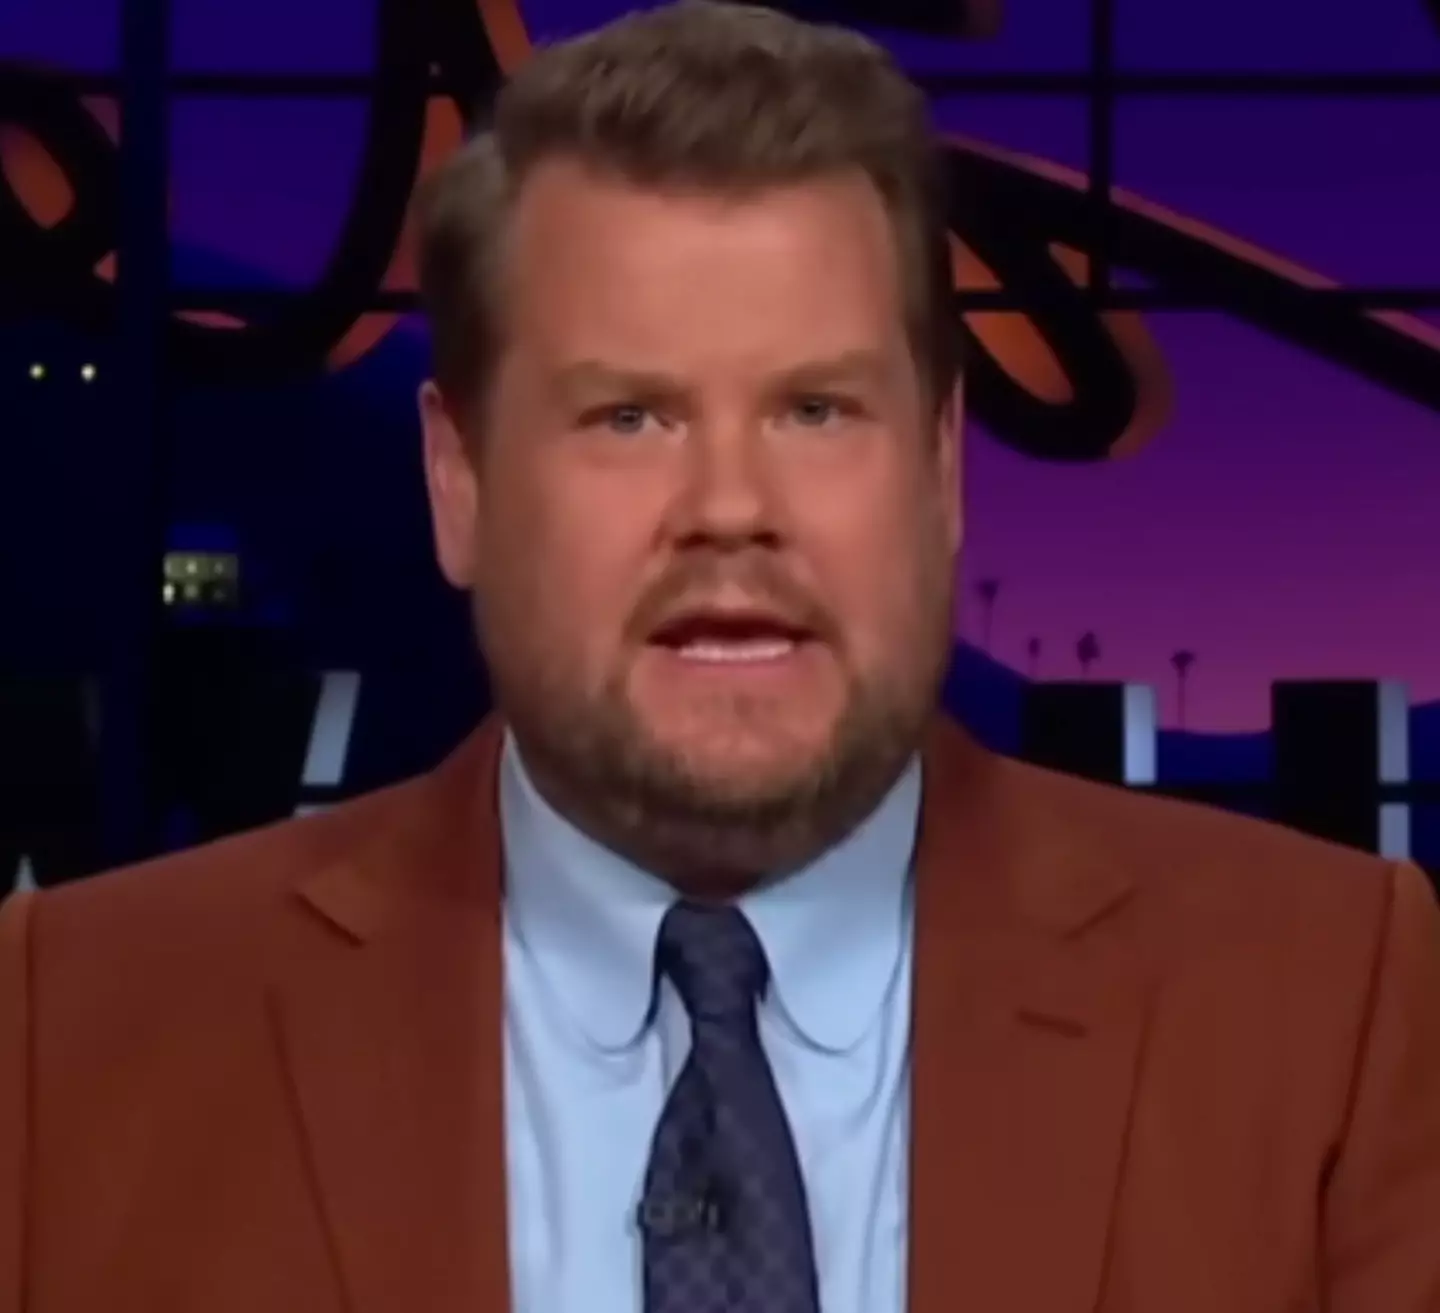 James Corden had a warning for the US on his final episode of The Late Late Show.